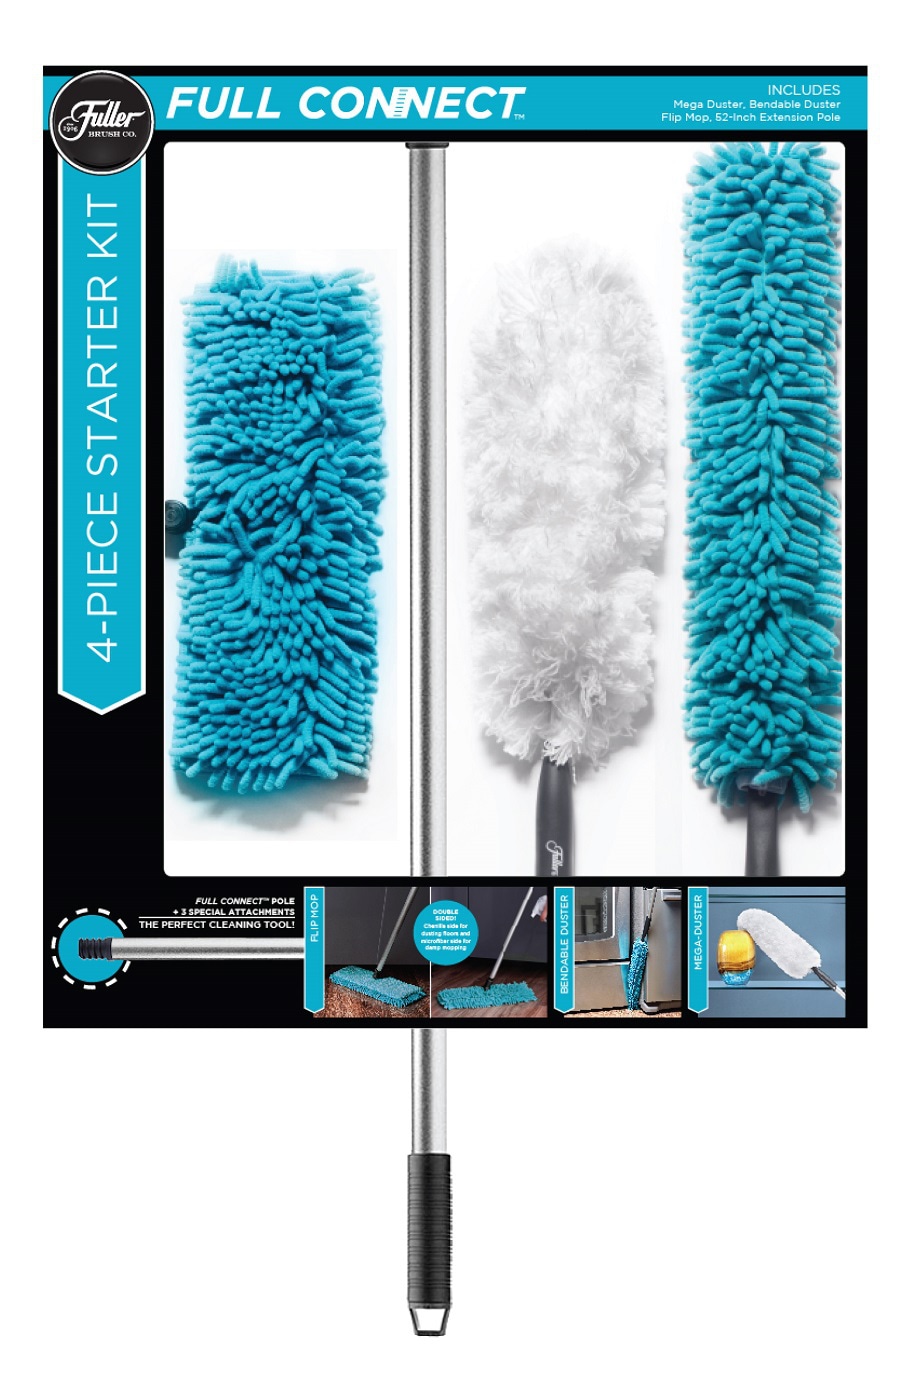 Multipurpose Cleaning Brush / Fan Cleaner mop Unboxing & Review ! 